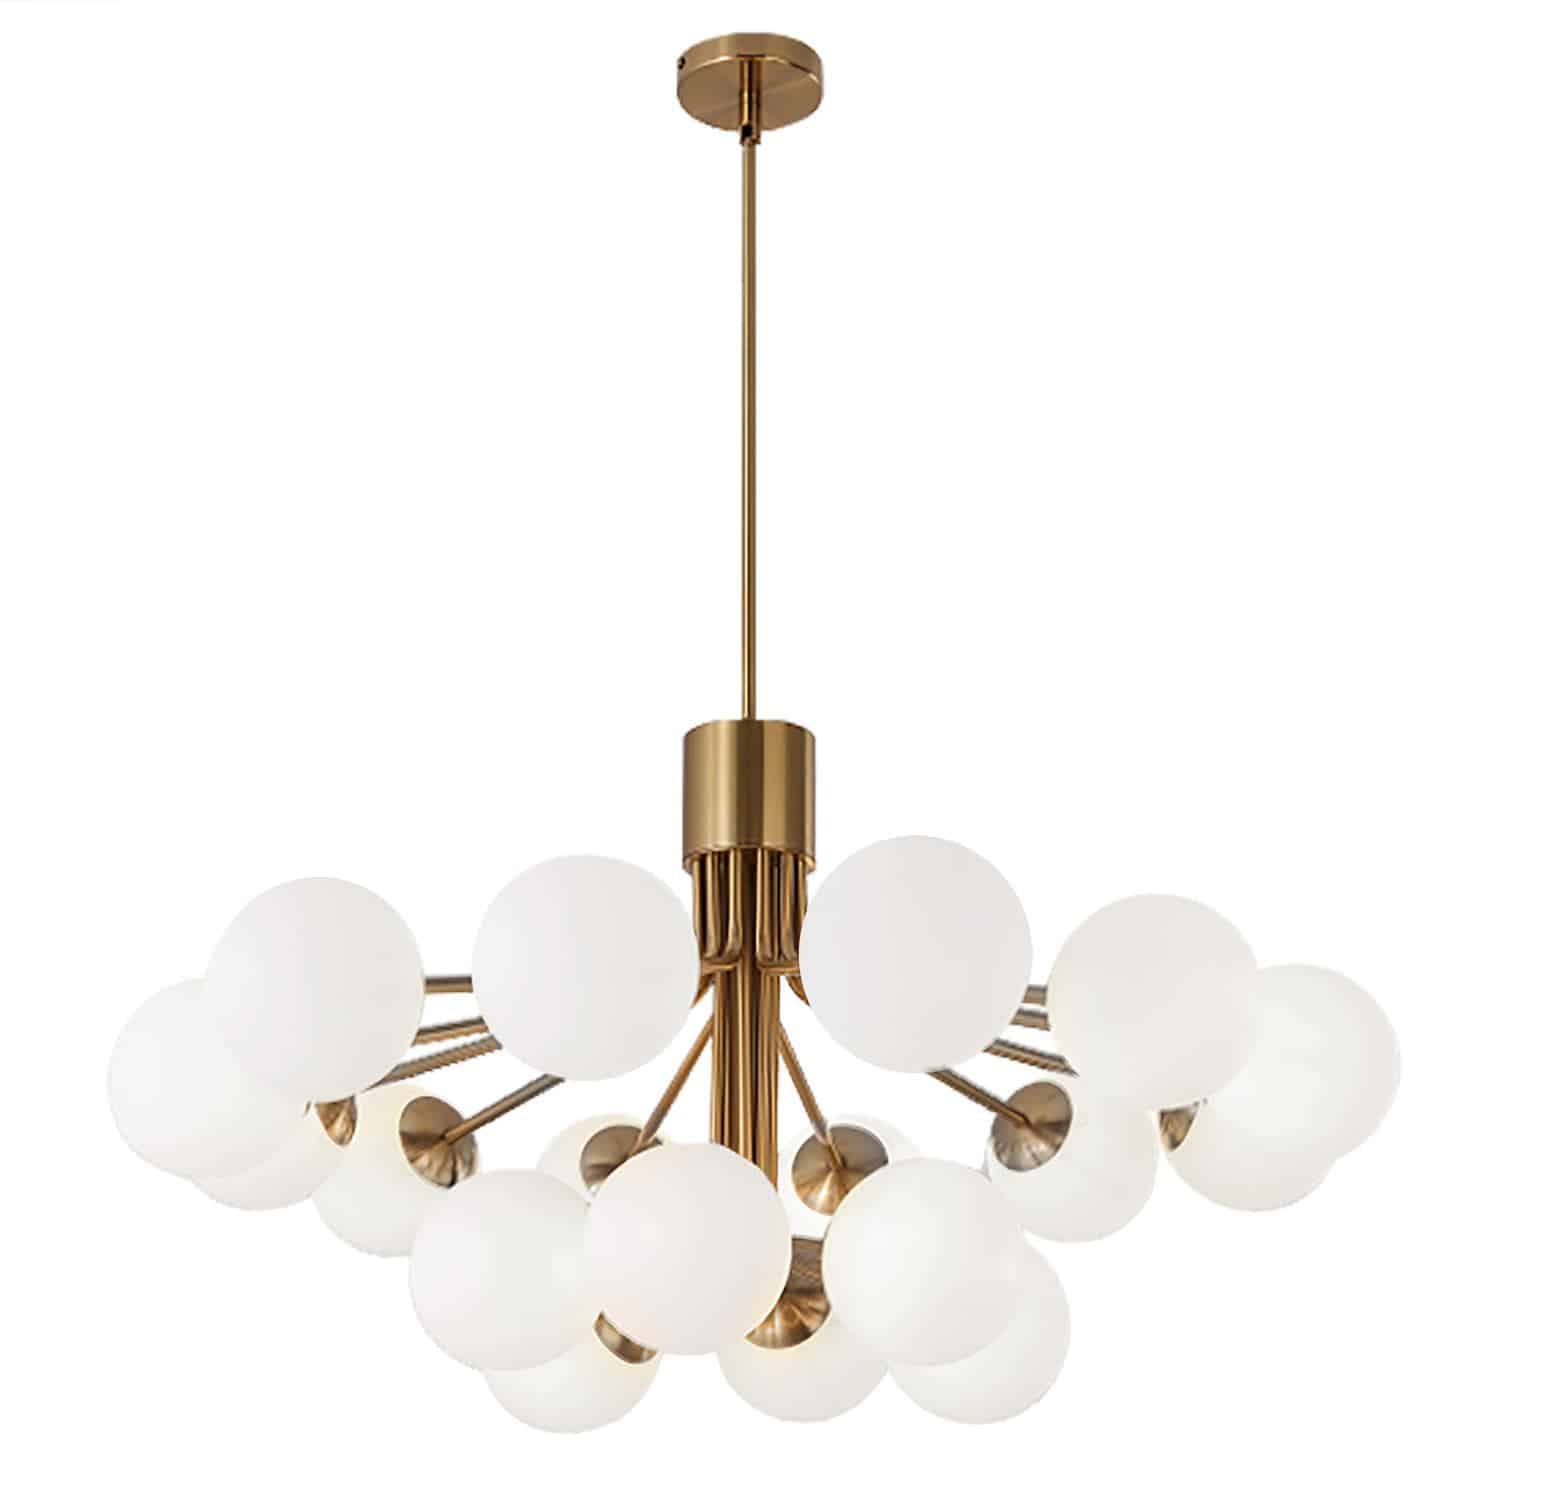 With graceful curved lines and round glass lights, the Amanda family of lighting adds a note of Parisian-style charm to any modern décor scheme. It's a statement chandelier perfect for dining, living, or master bedrooms, or to set a stylish tone in the foyer.  The look is bright, beautiful, and thoroughly contemporary, with a metal body available in your choice of finish and configuration. White glass creates softer, face-friendly lighting that illuminates without glare.  The Amanda family of lighting offers contemporary glamour with a note of luxury that is sure to be noticed.